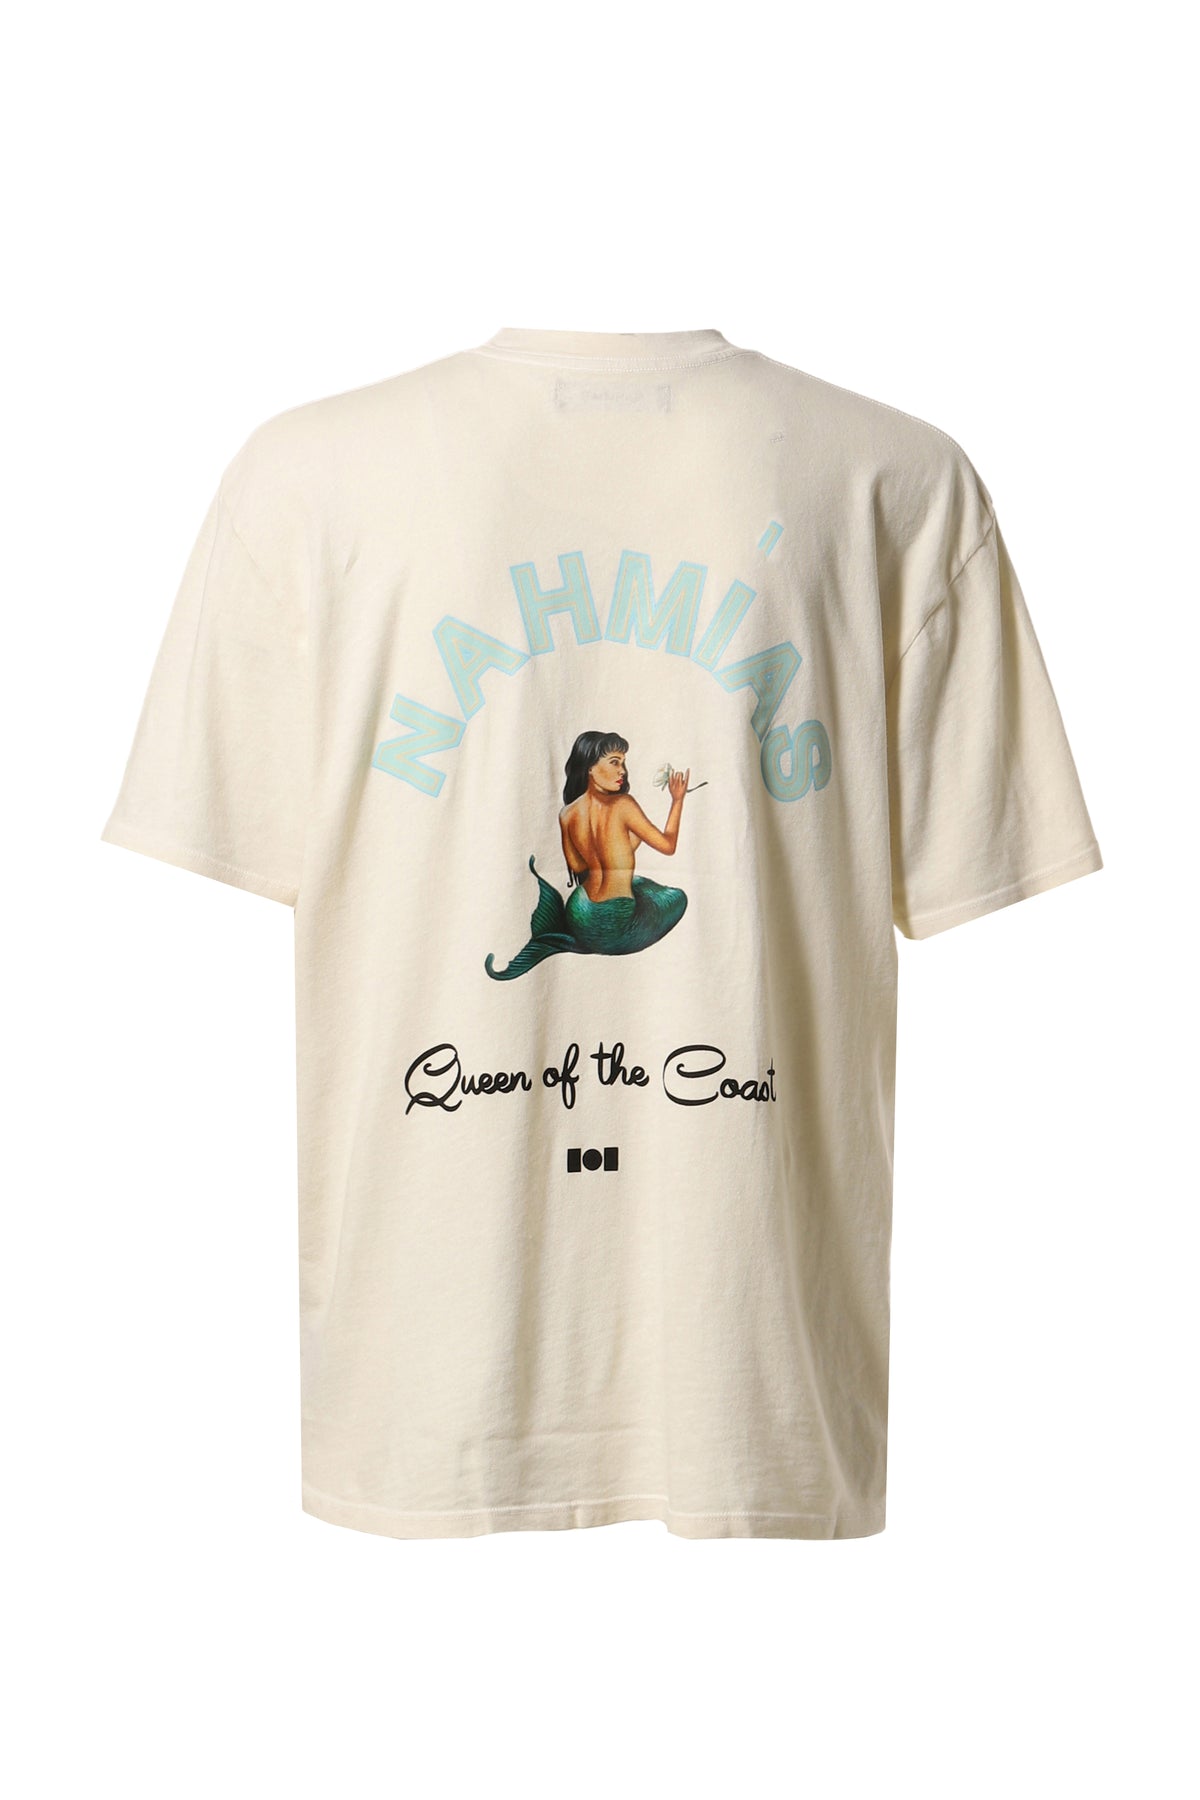 QUEEN OF THE COAST T-SHIRT / WHT